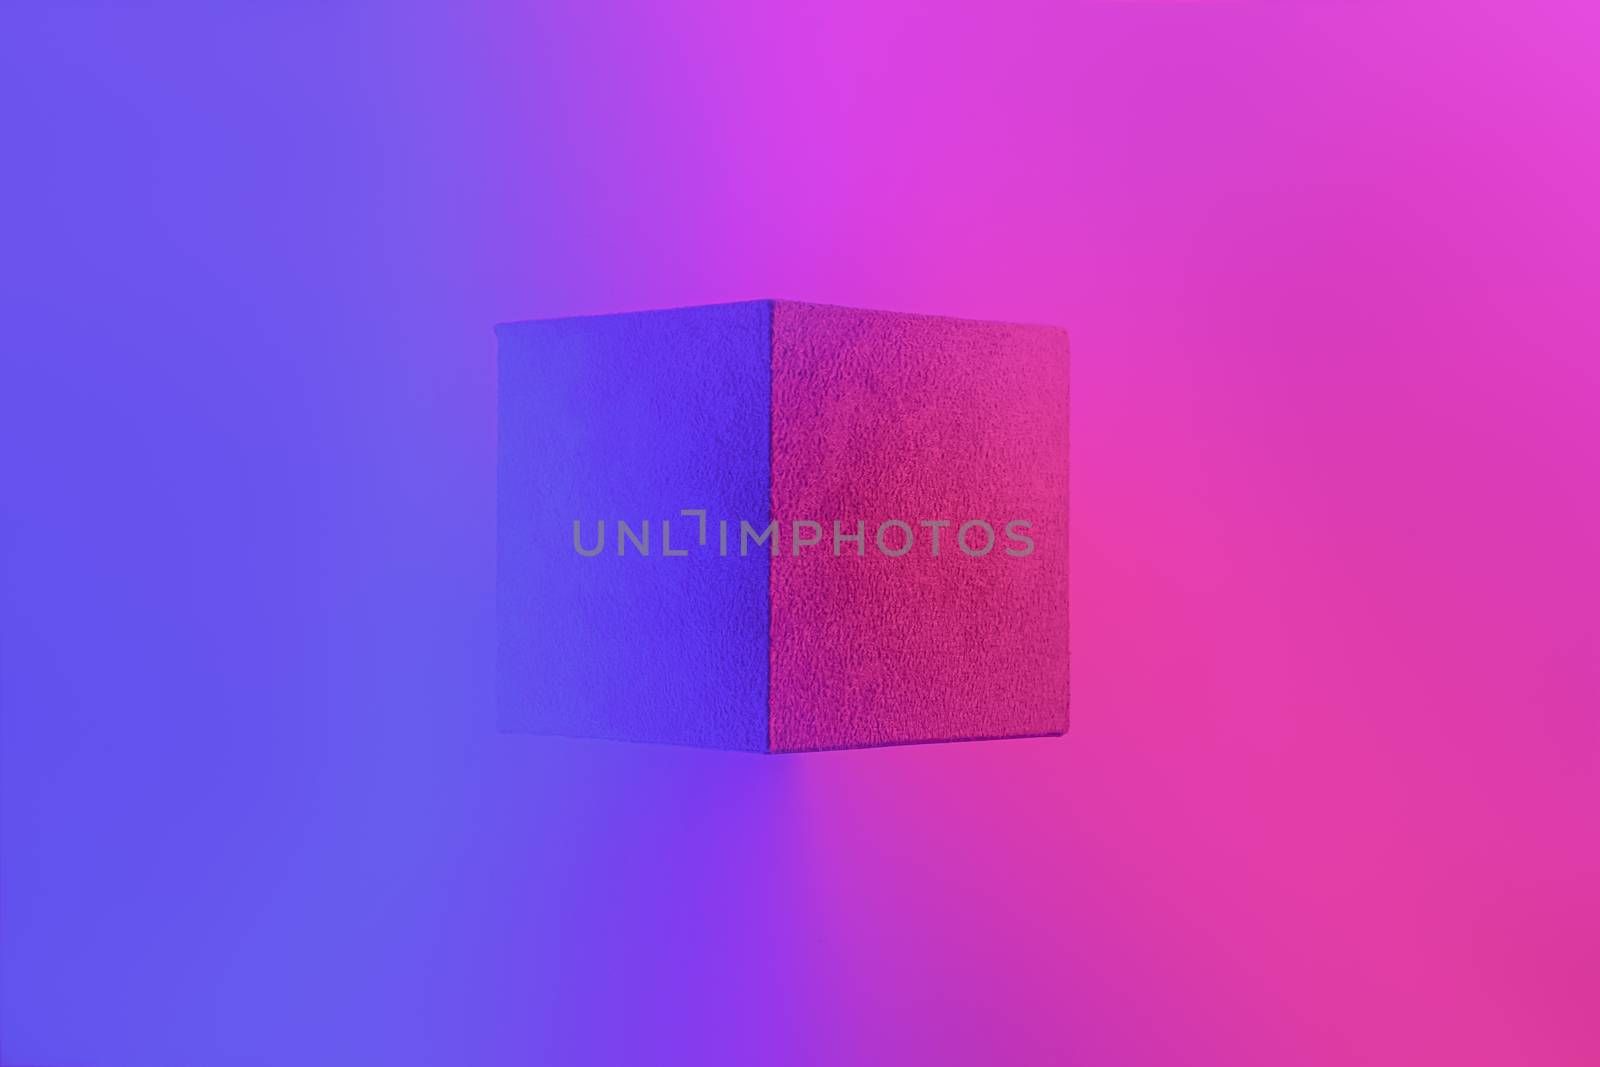 Geometric cube figure in vibrant neon colors by photoboyko